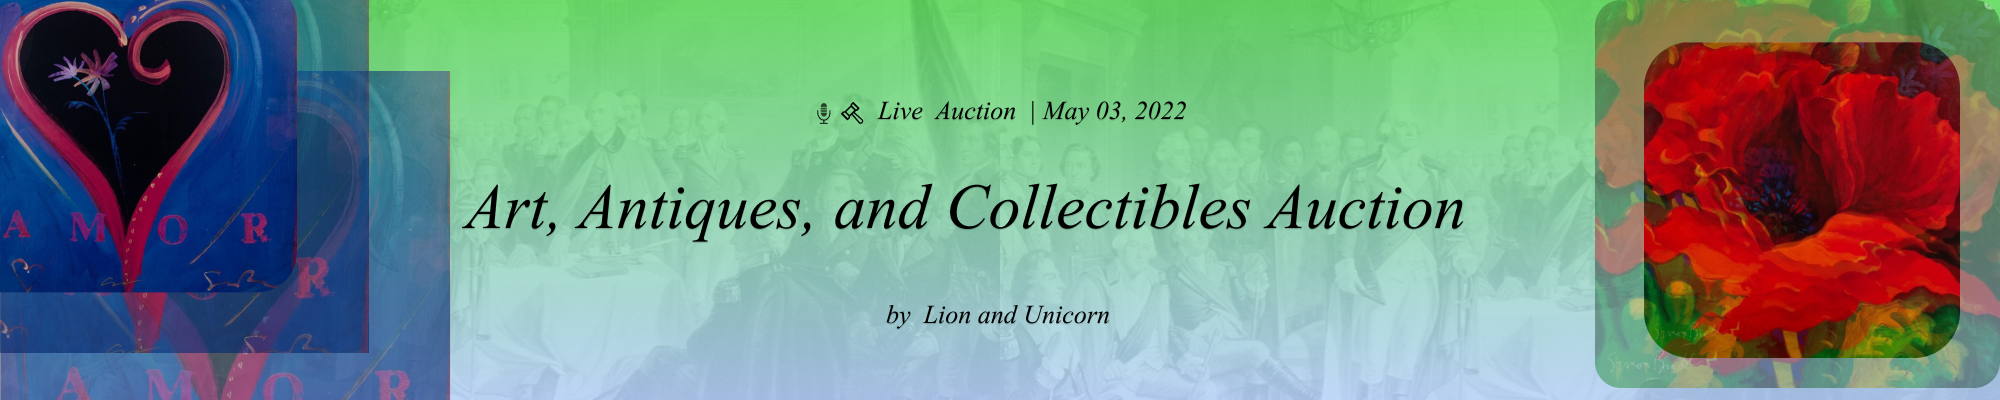 Art, Antiques, and Collectibles Auction